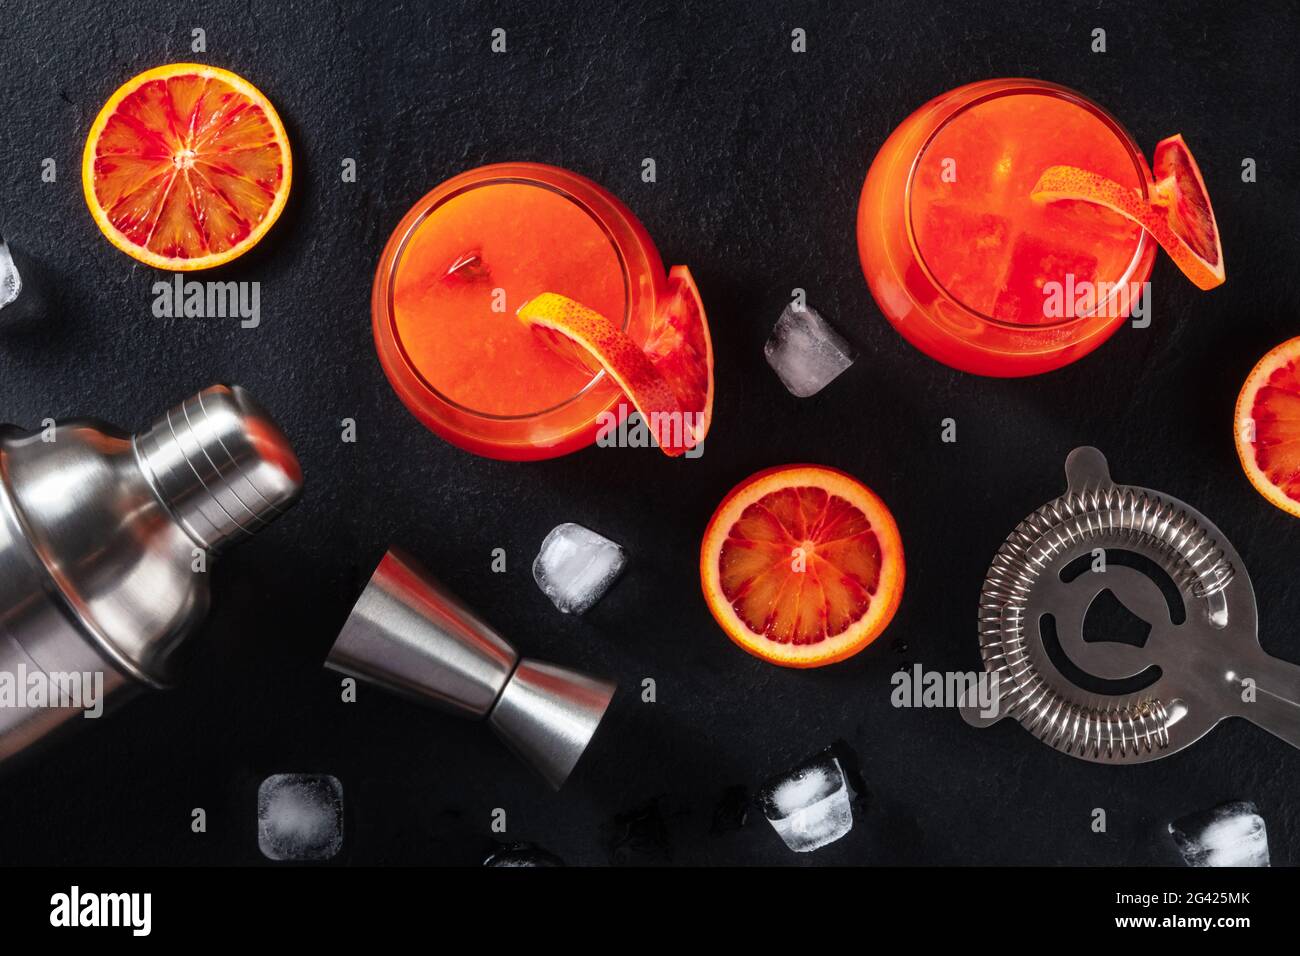 Orange cocktails with bar accessories, overhead shot on a black background Stock Photo